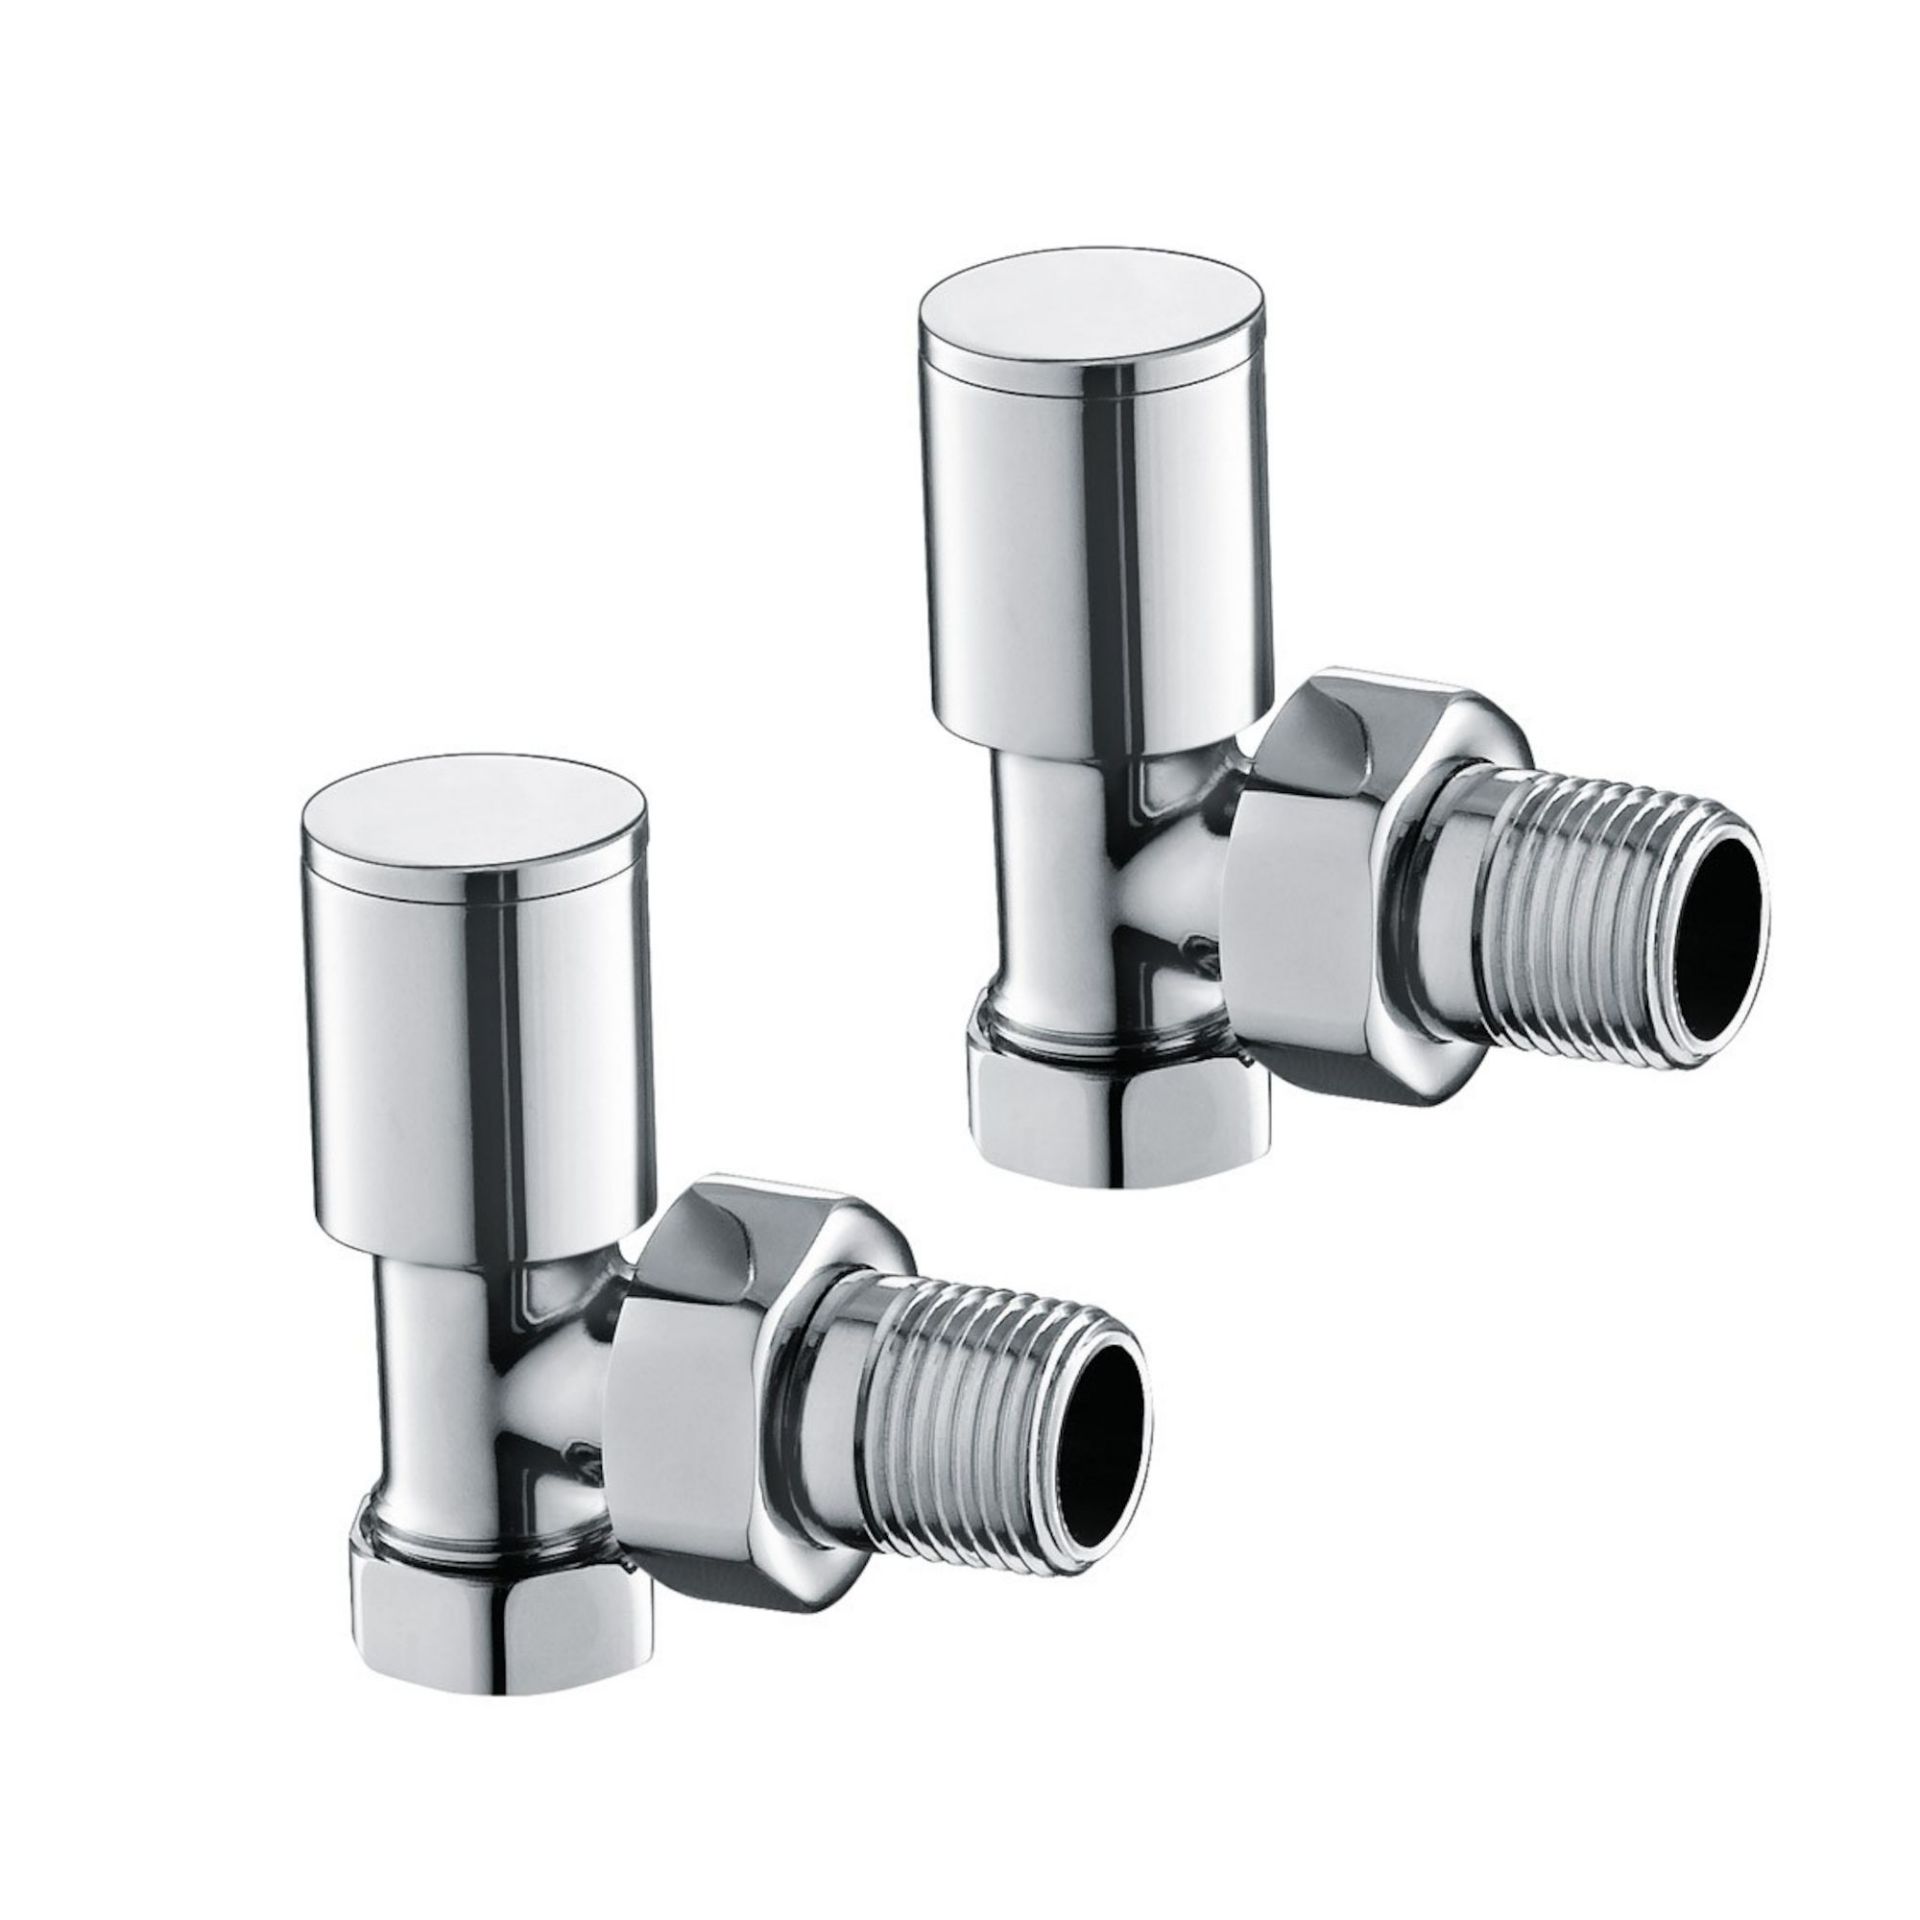 (NV1000) 15mm Standard Connection Angled Radiator Valves - Heavy Duty Polished Chrome Plated Br... - Image 2 of 3